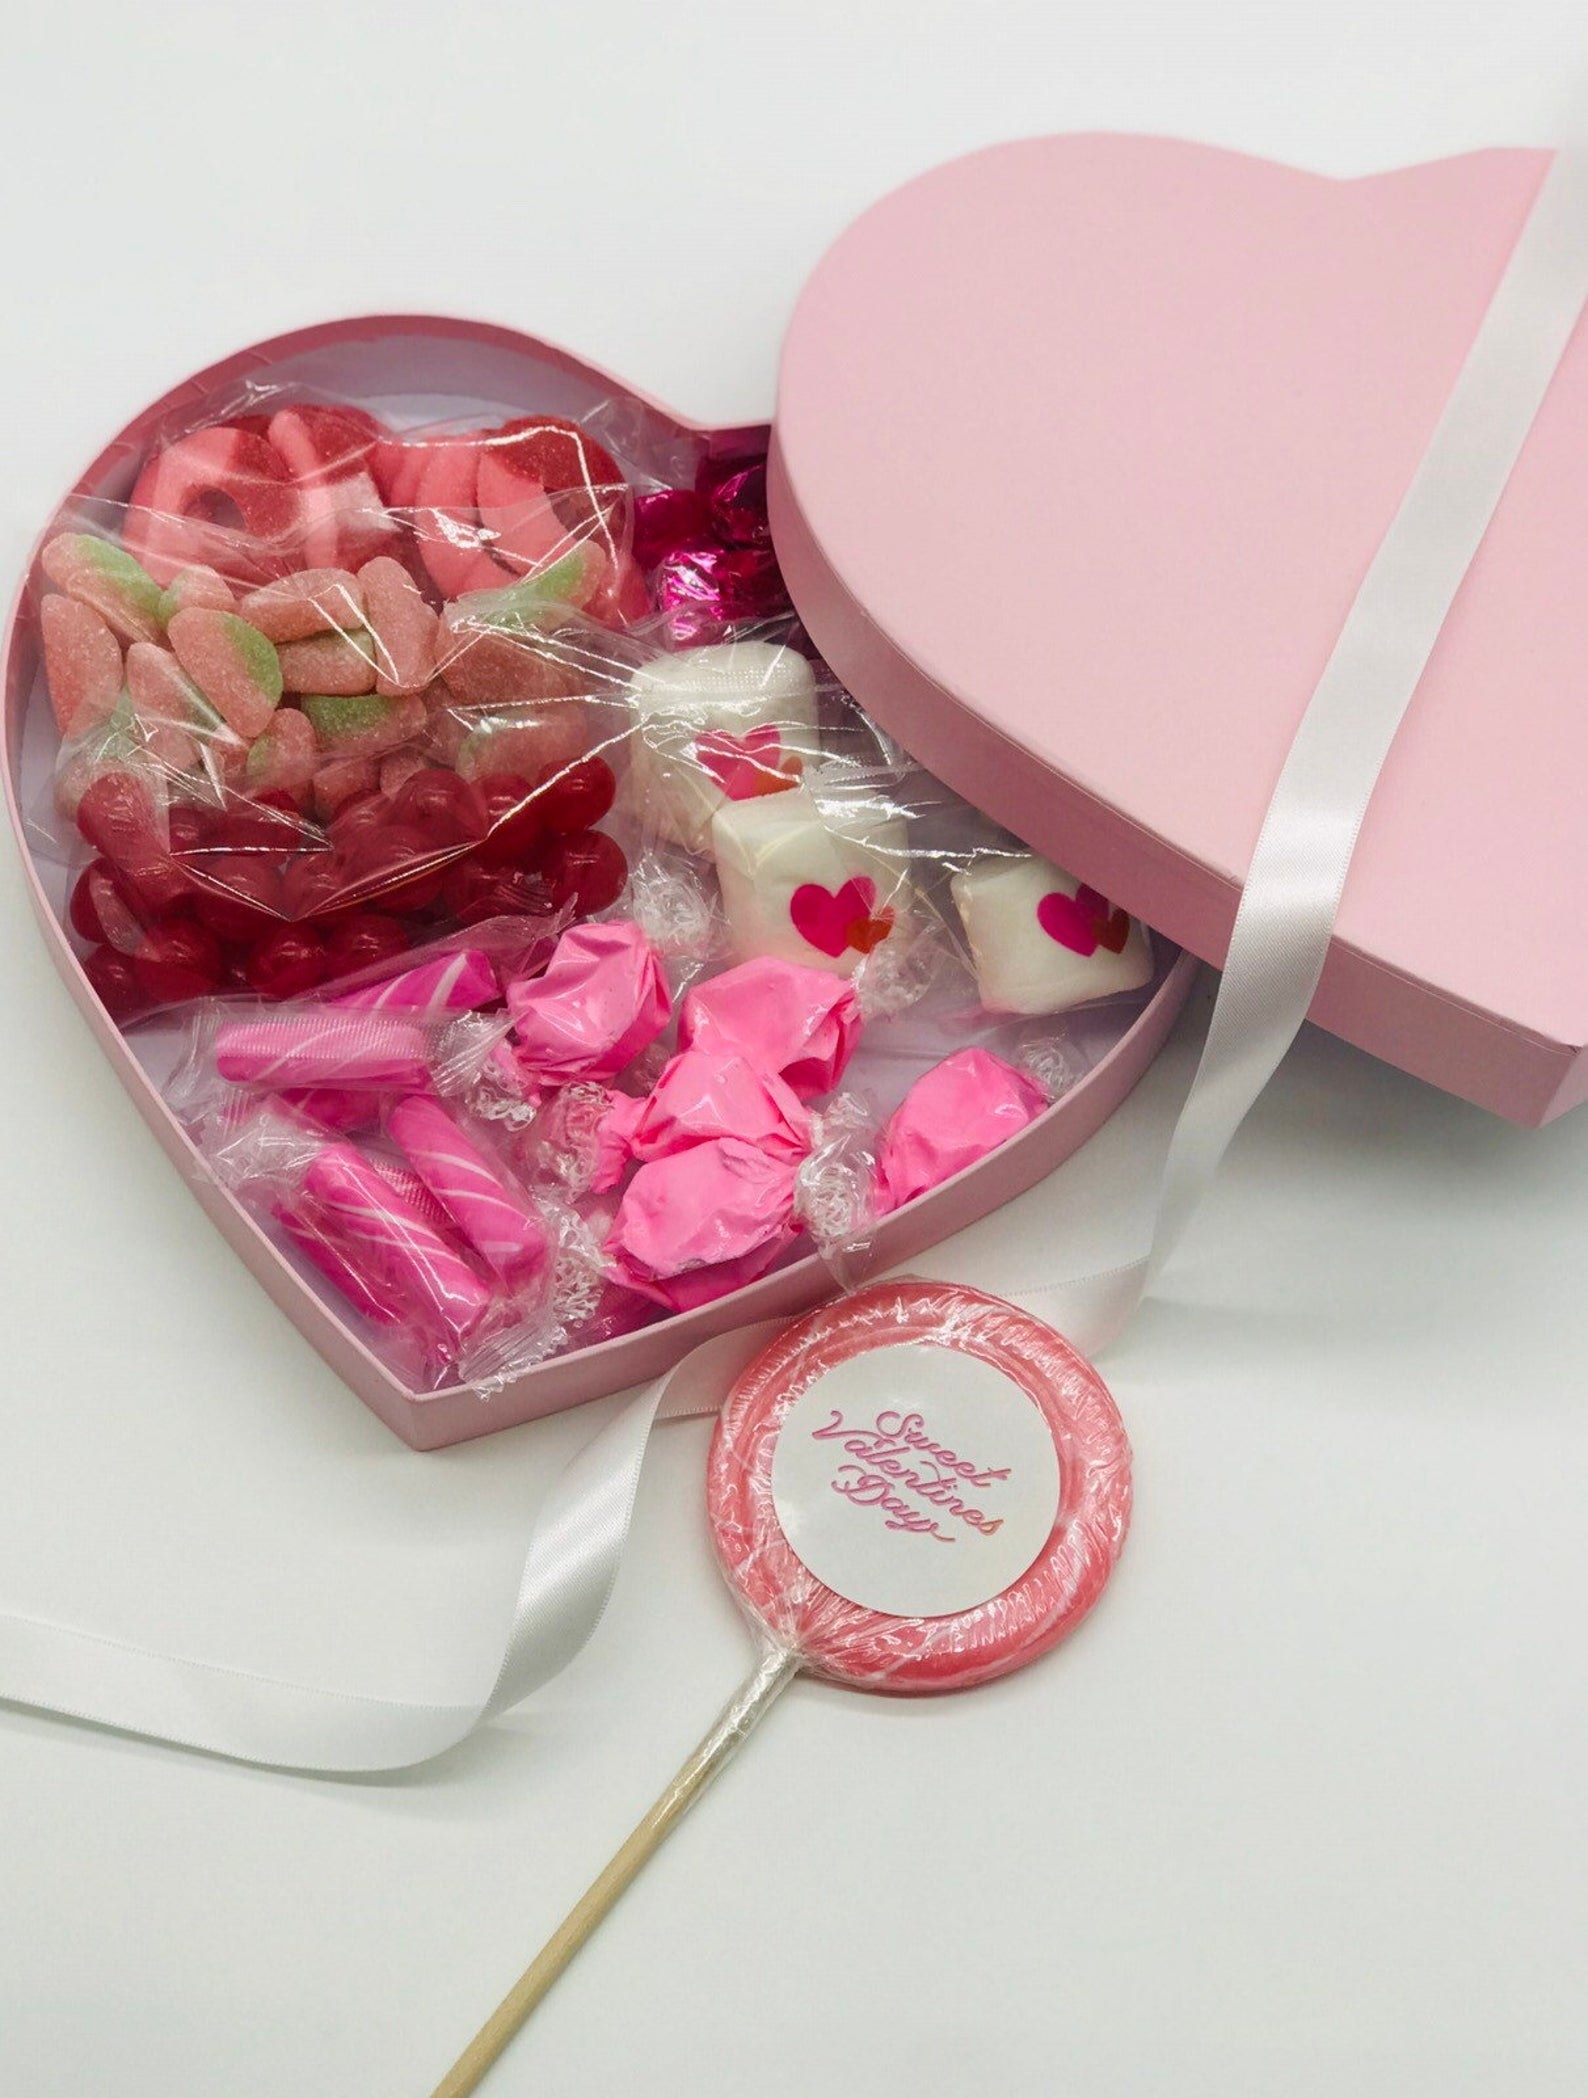 pink heart-shaped box filled with candy and marshmellows in pink and red colors